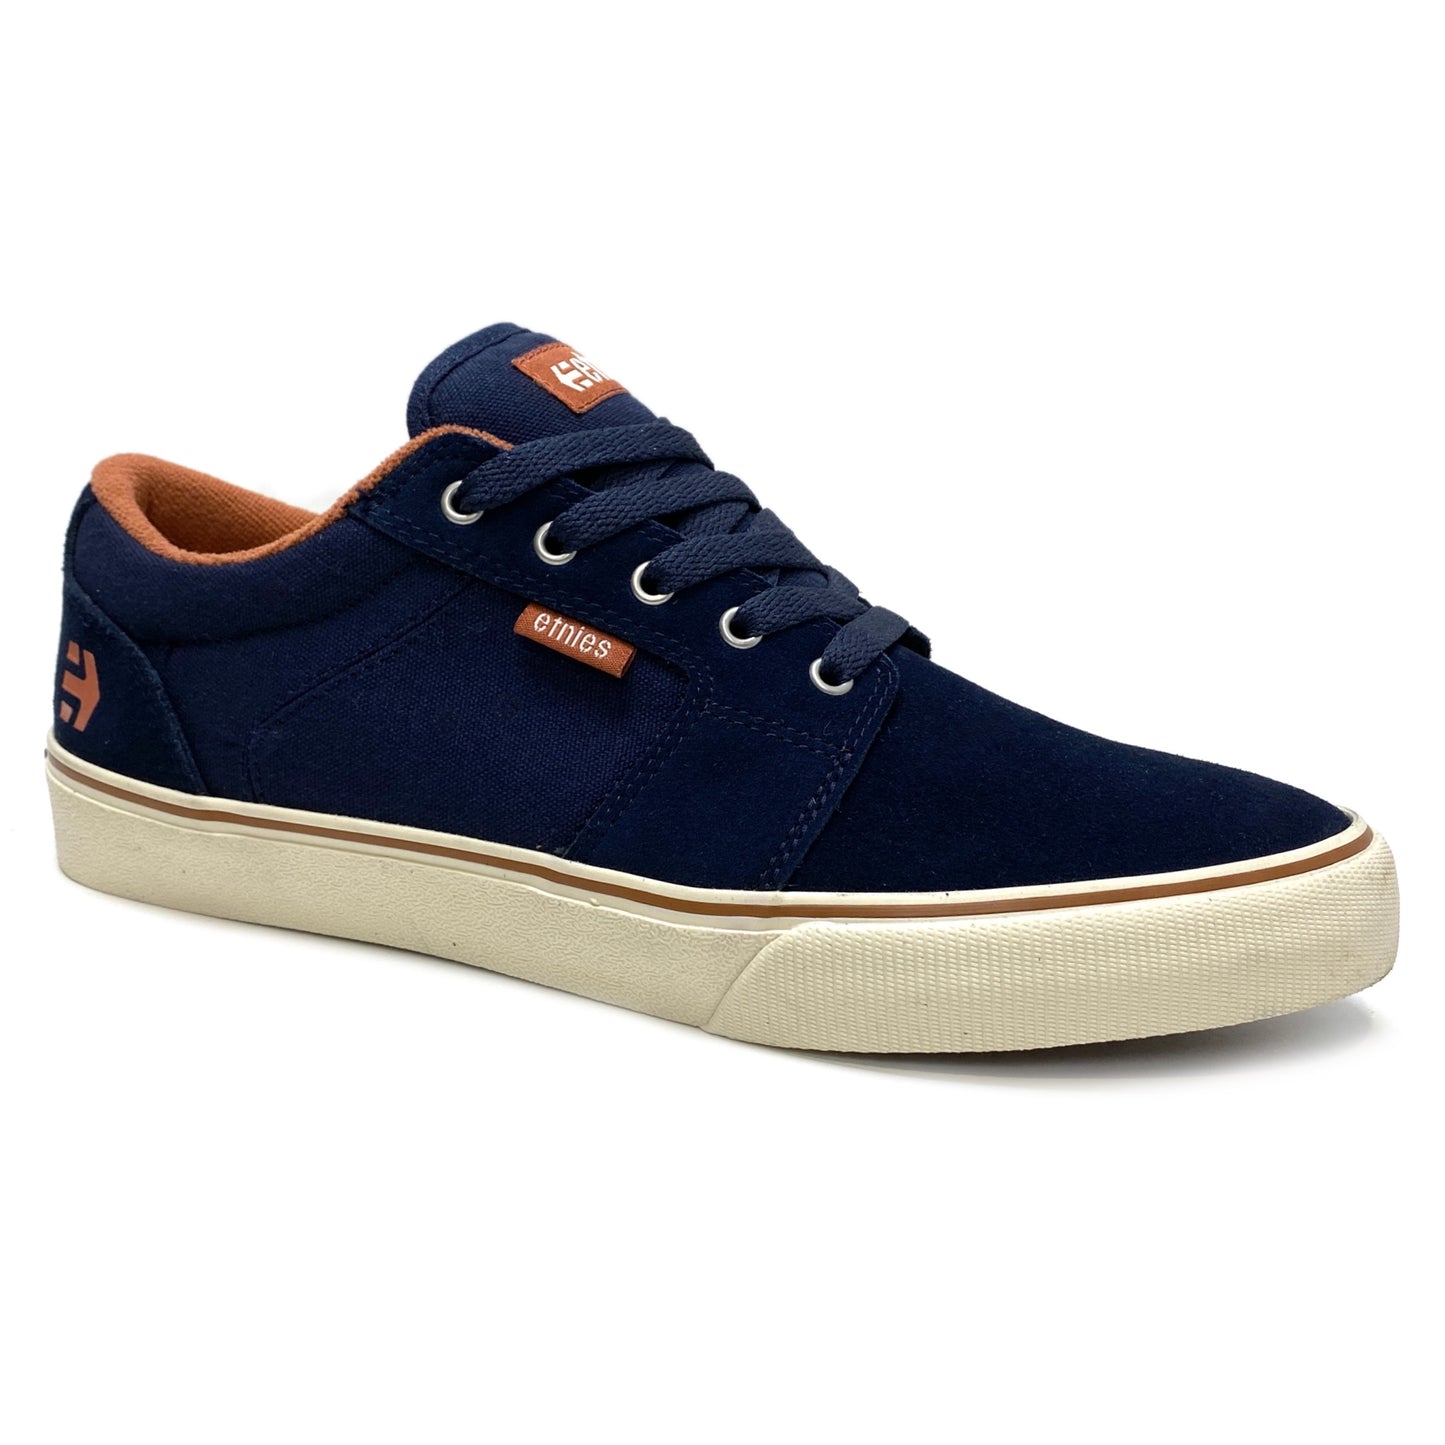 ETNIES BARGE LS NAVY & WHITE TRAINERS